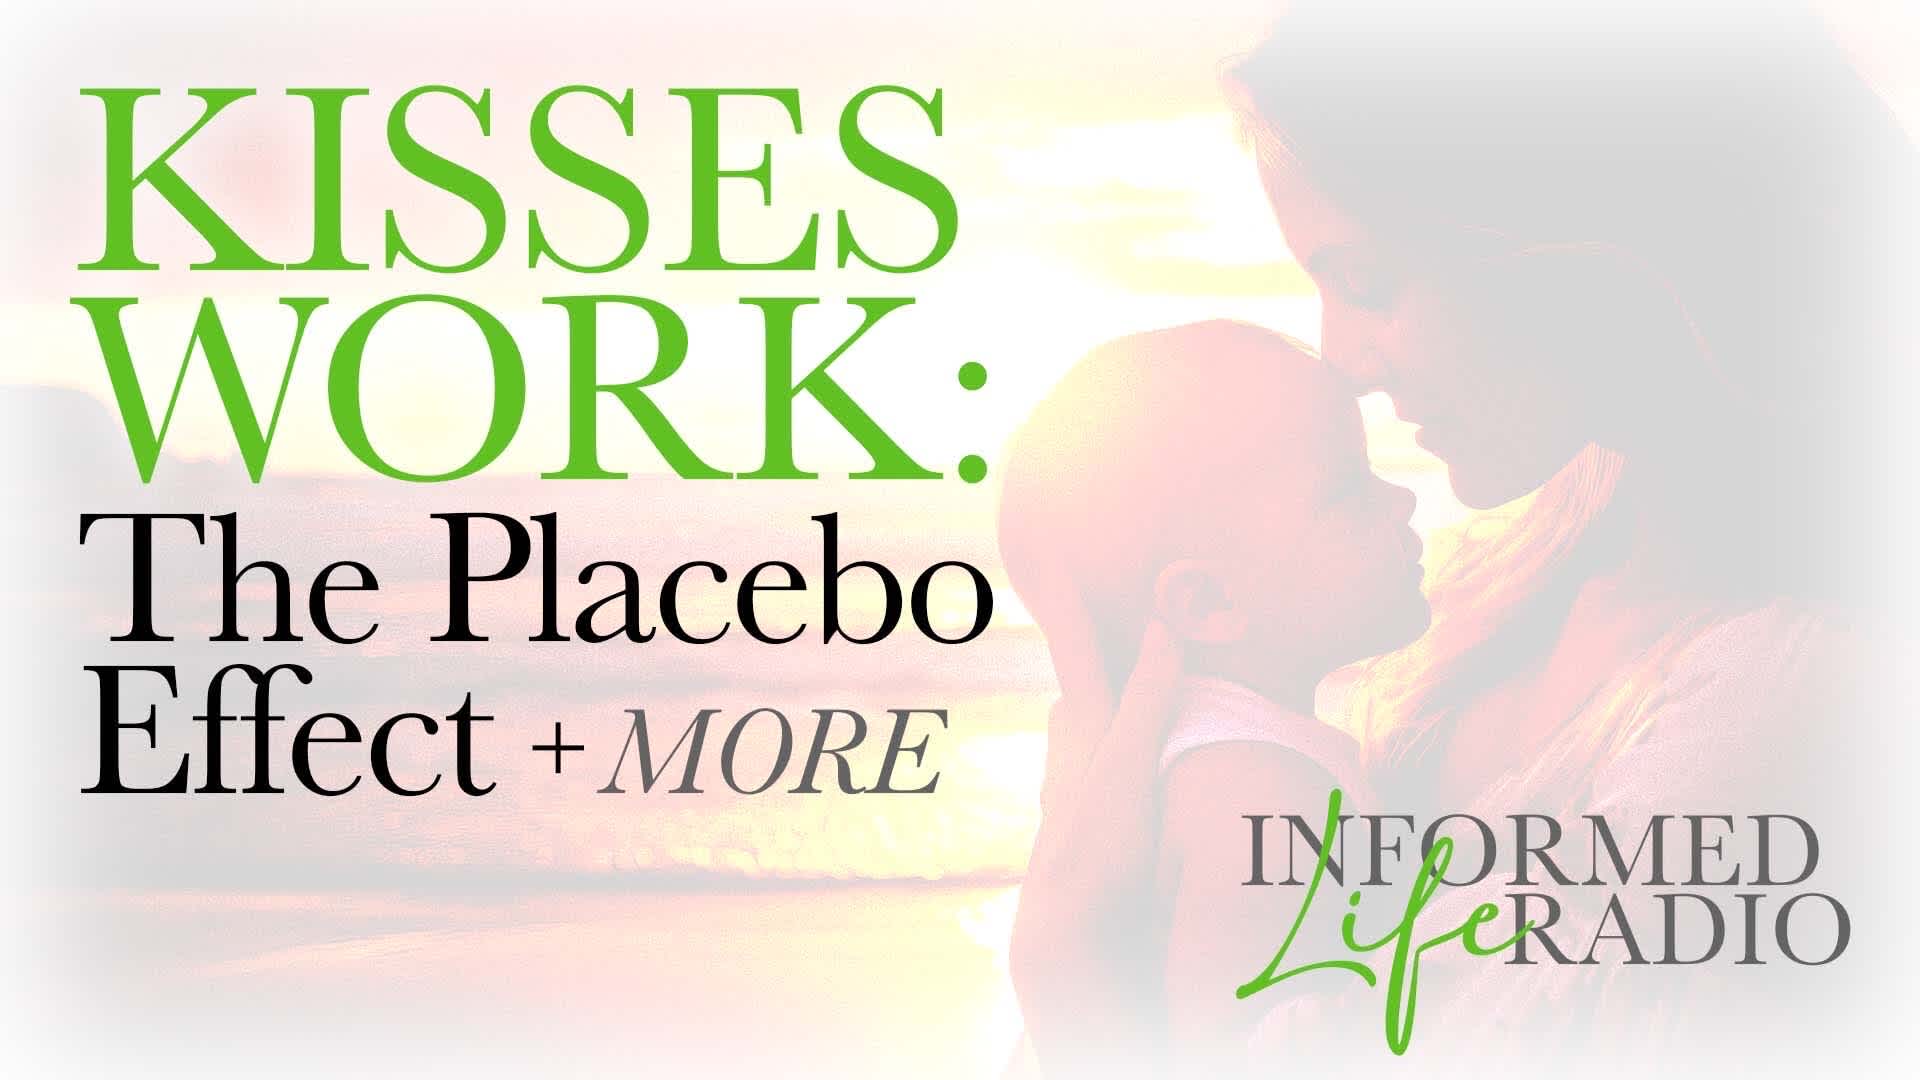 Kisses Work: The Placebo Effect + More